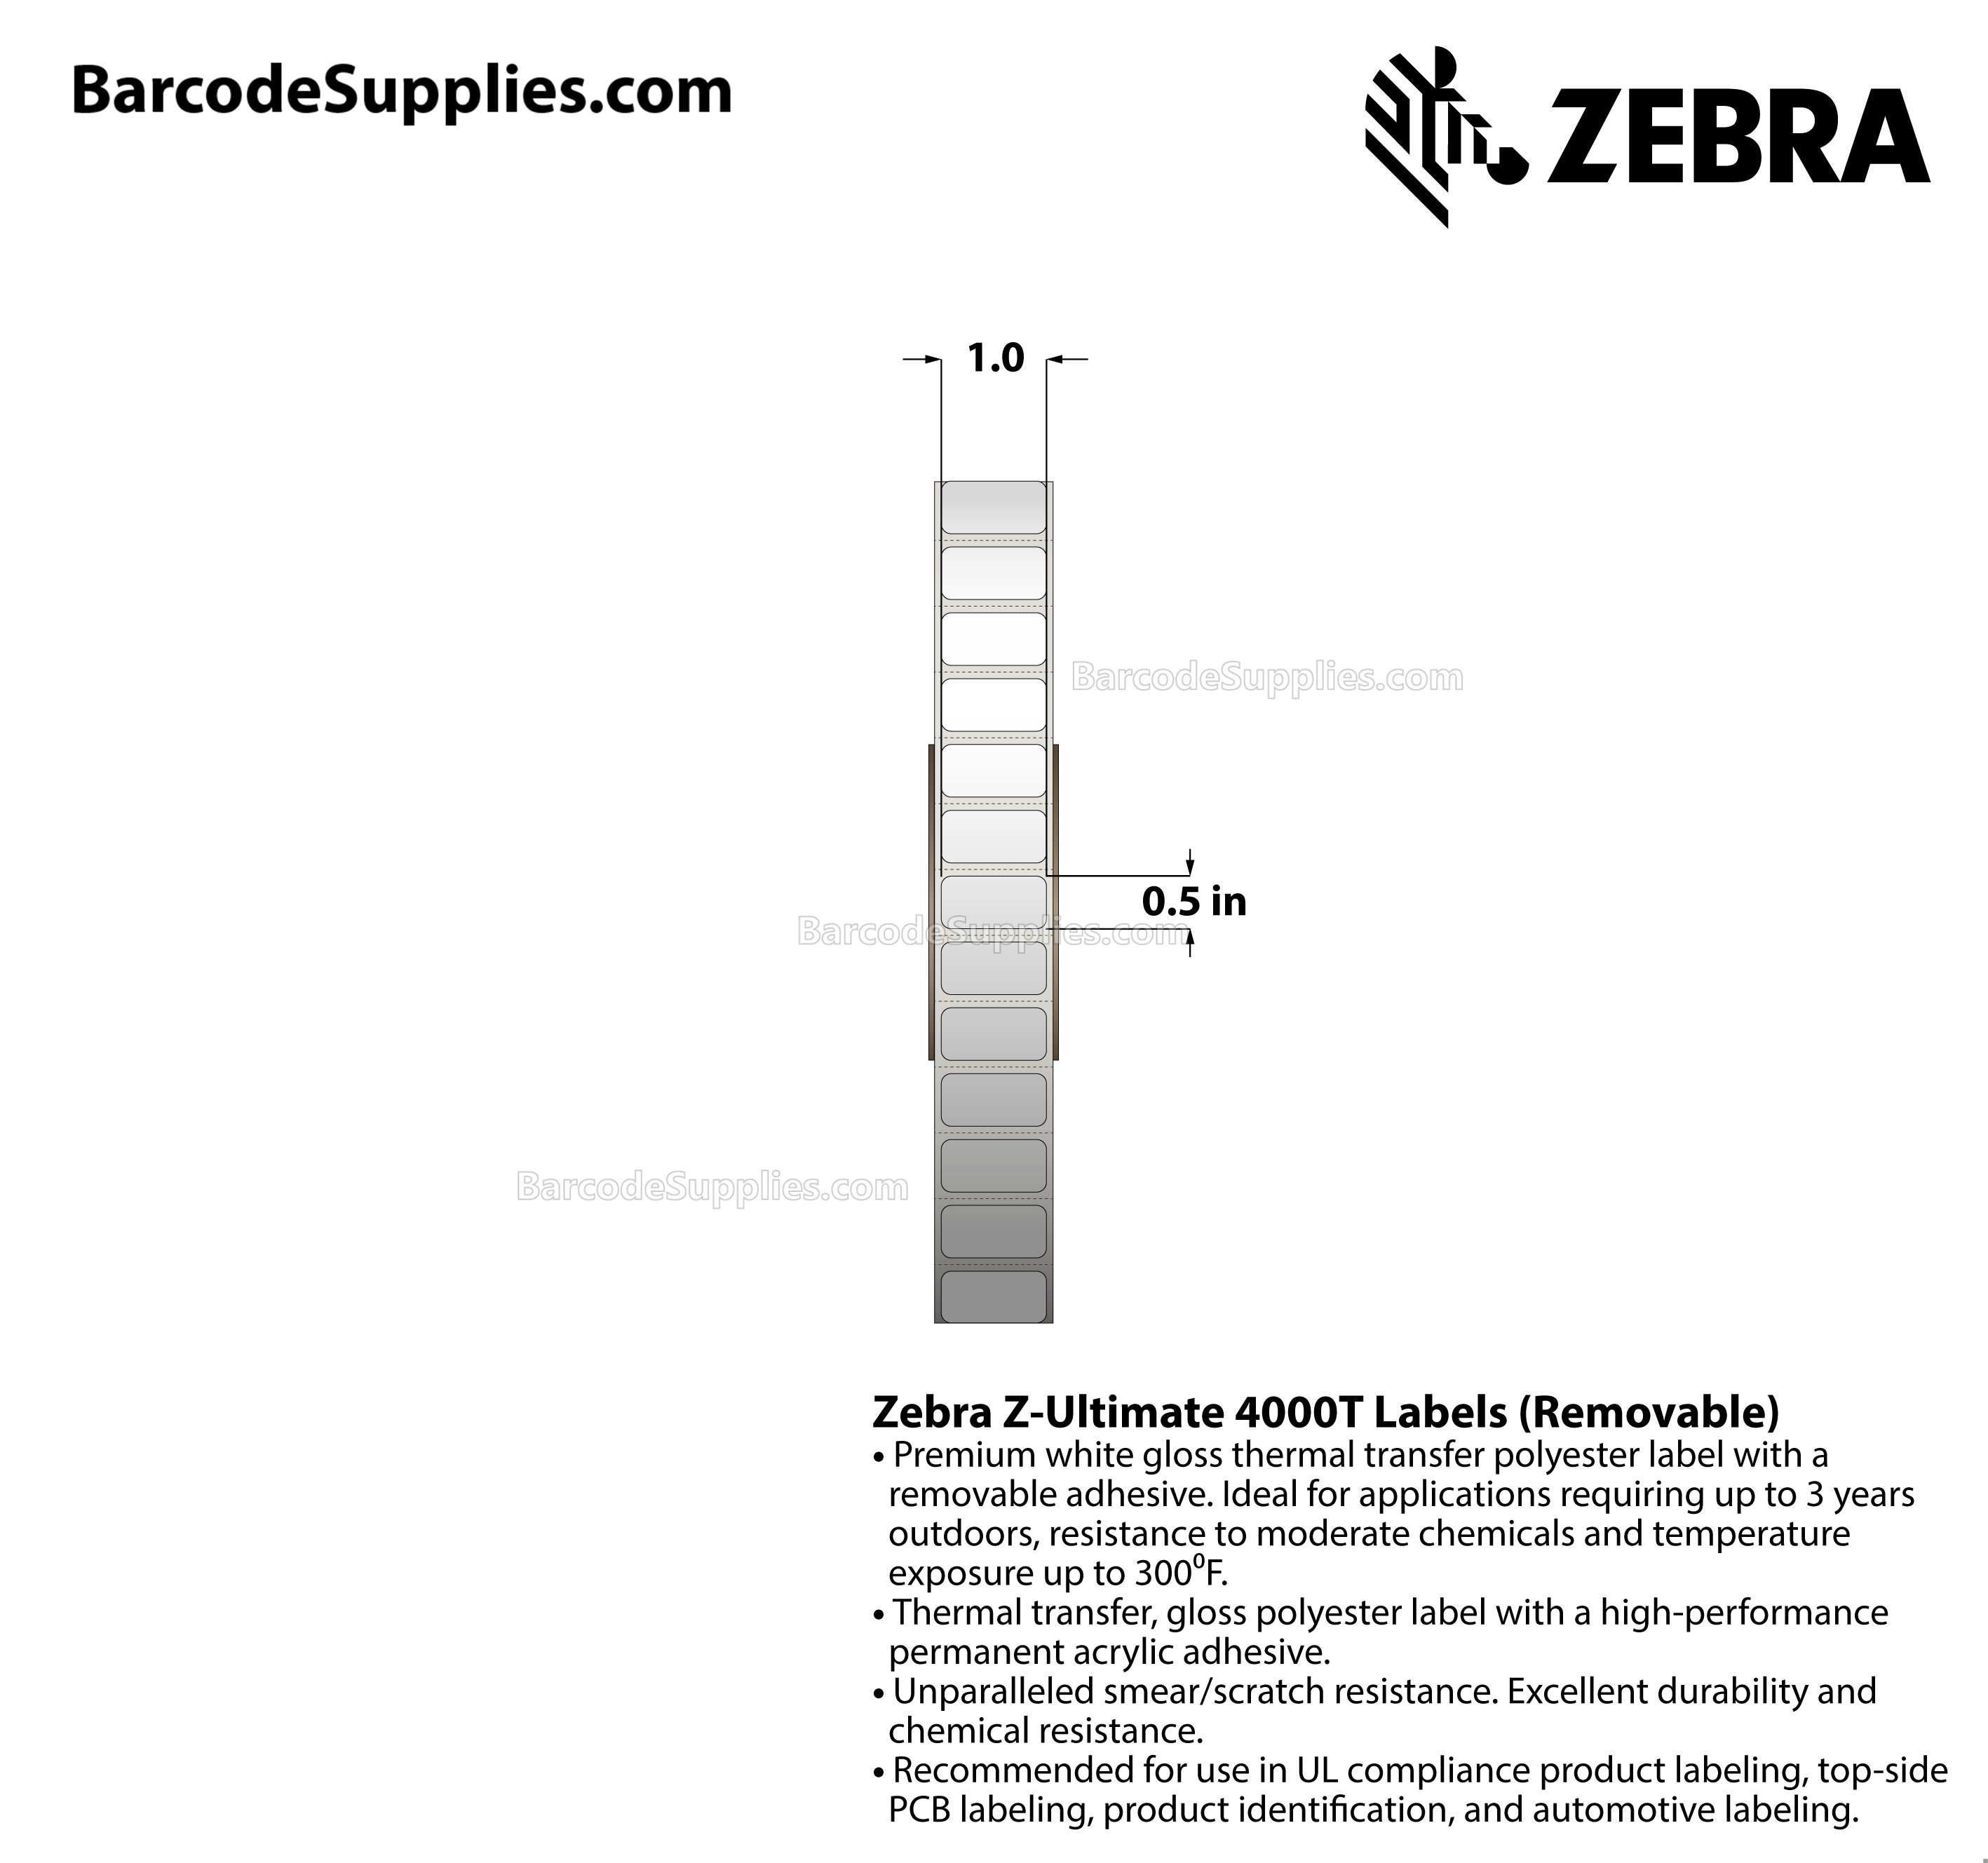 1 x 0.5 Thermal Transfer White Z-Ultimate 4000T Removable Labels With Removable Adhesive - Perforated - 10000 Labels Per Roll - Carton Of 1 Rolls - 10000 Labels Total - MPN: 10023362